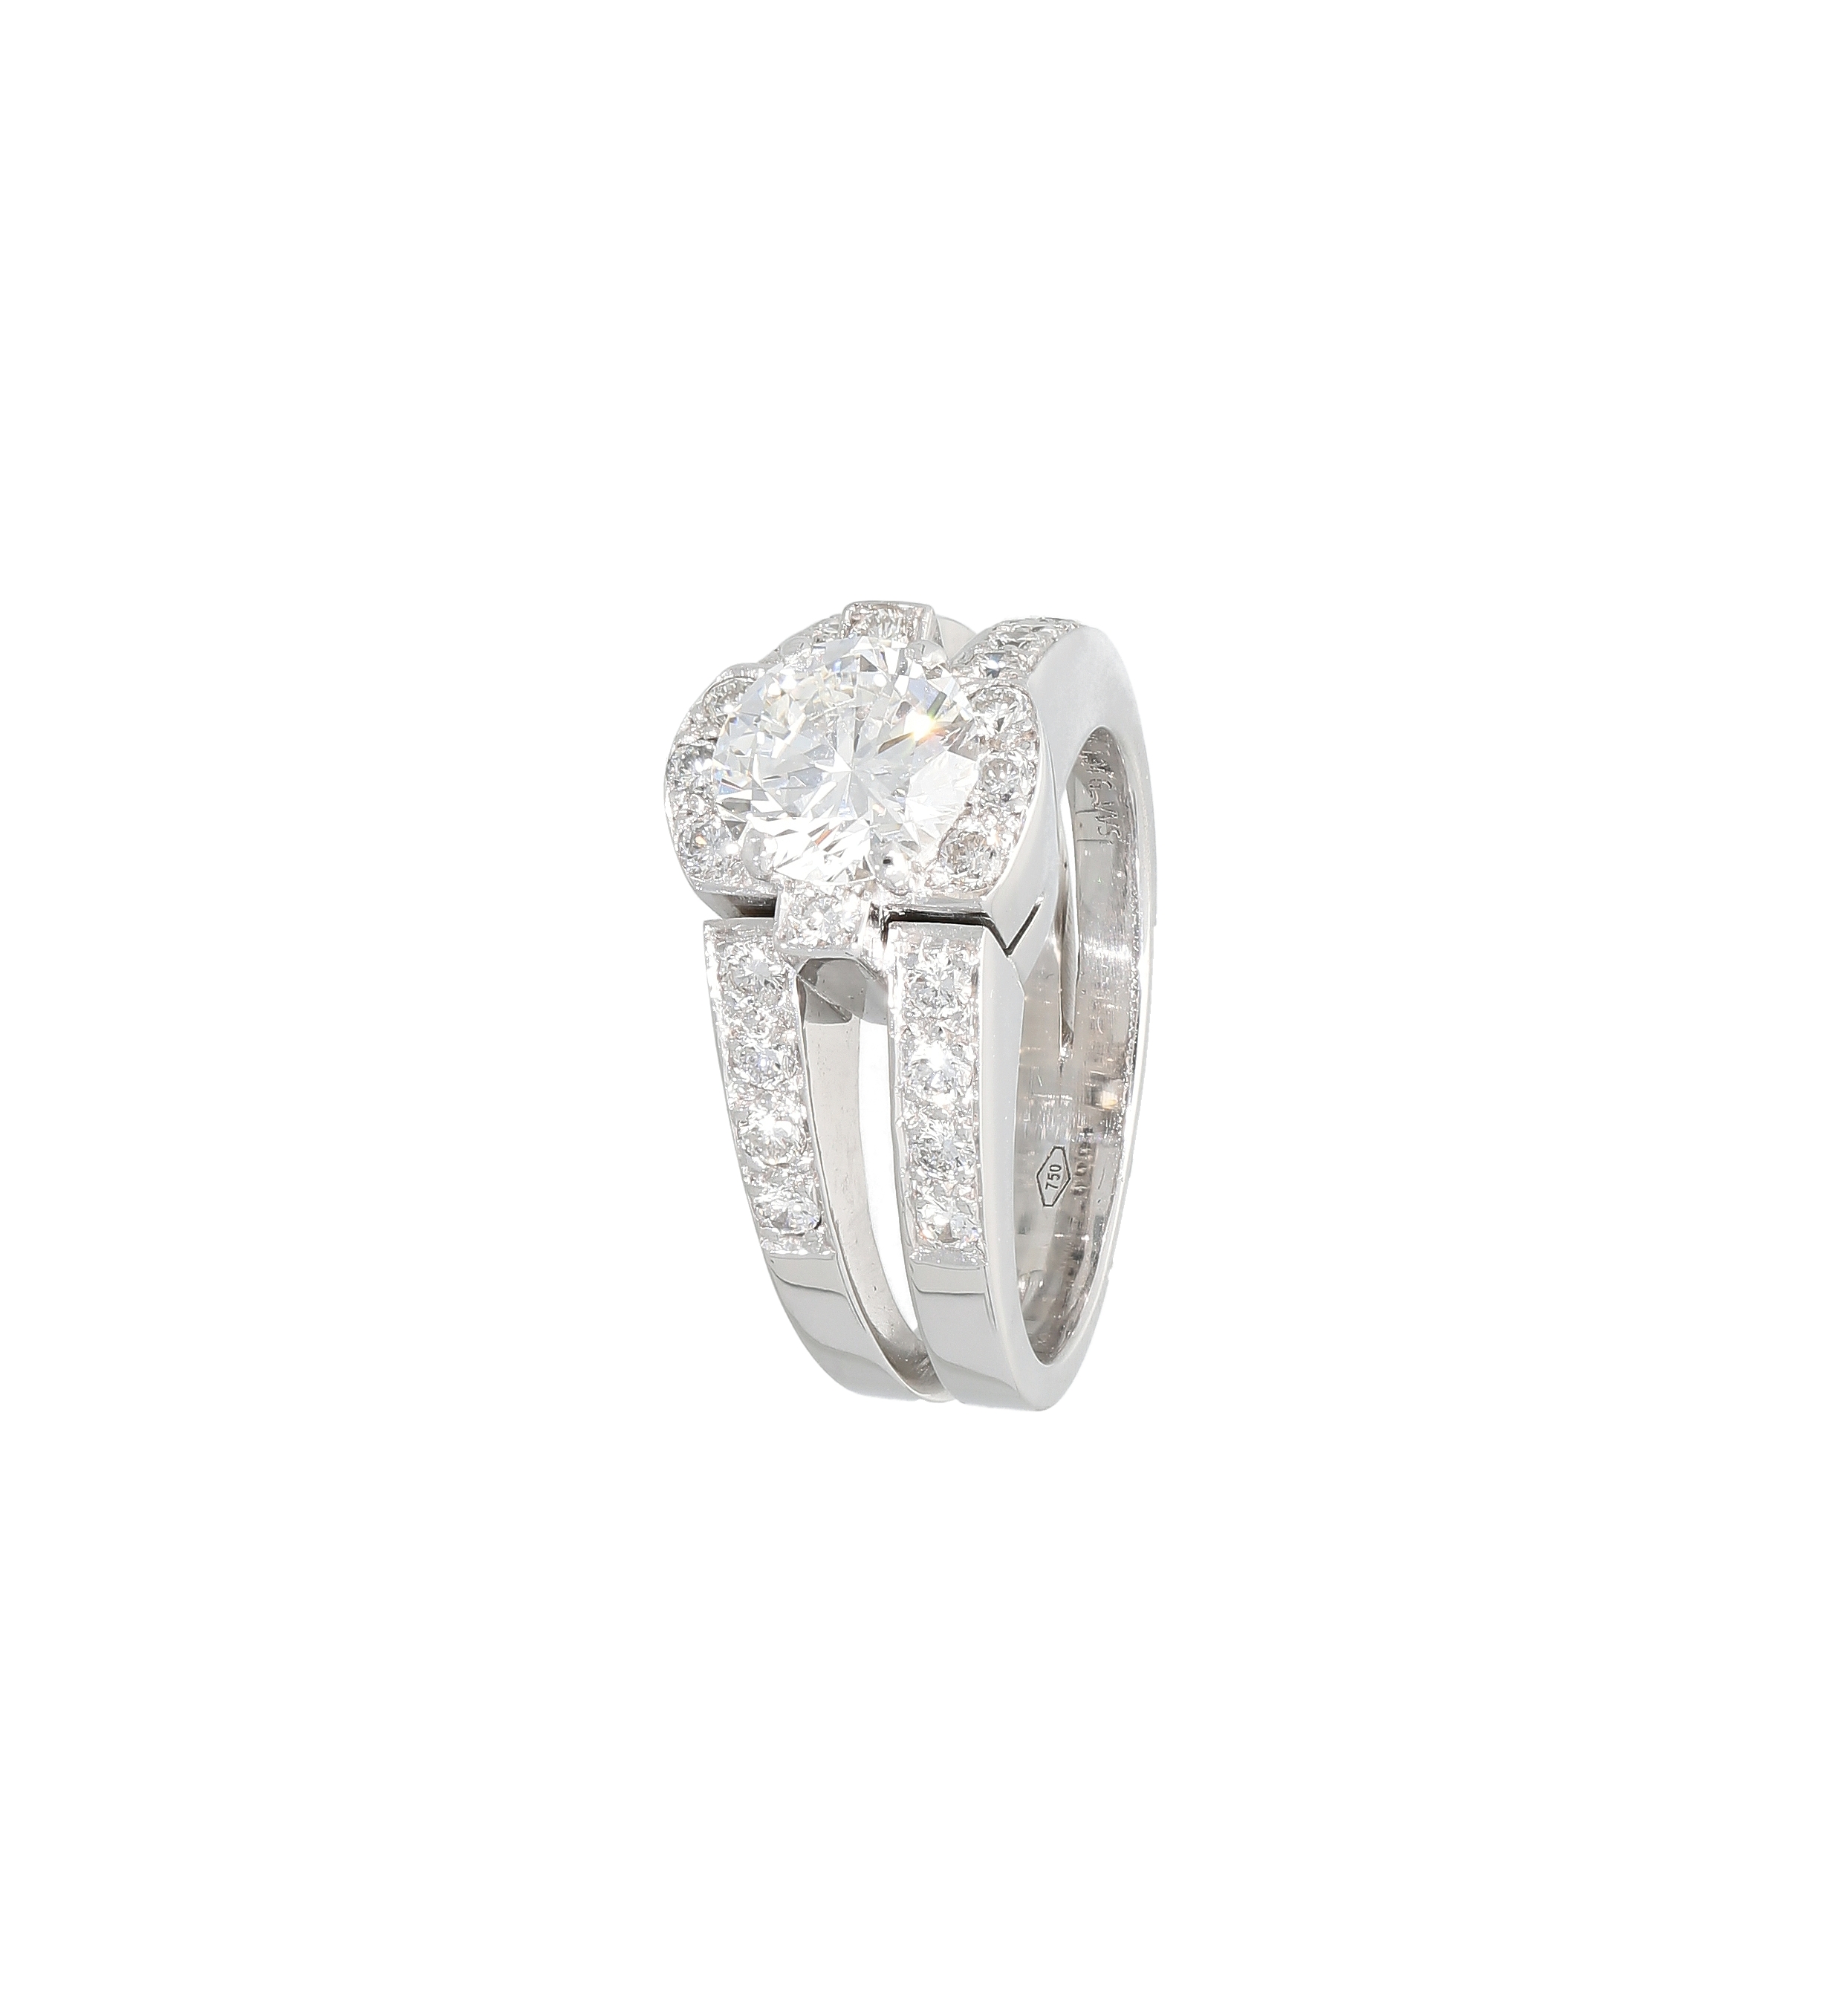 Exquisite Handmade Solitaire Ring with 1.34 ct Center Stone - Timeless Elegance in Every Detail